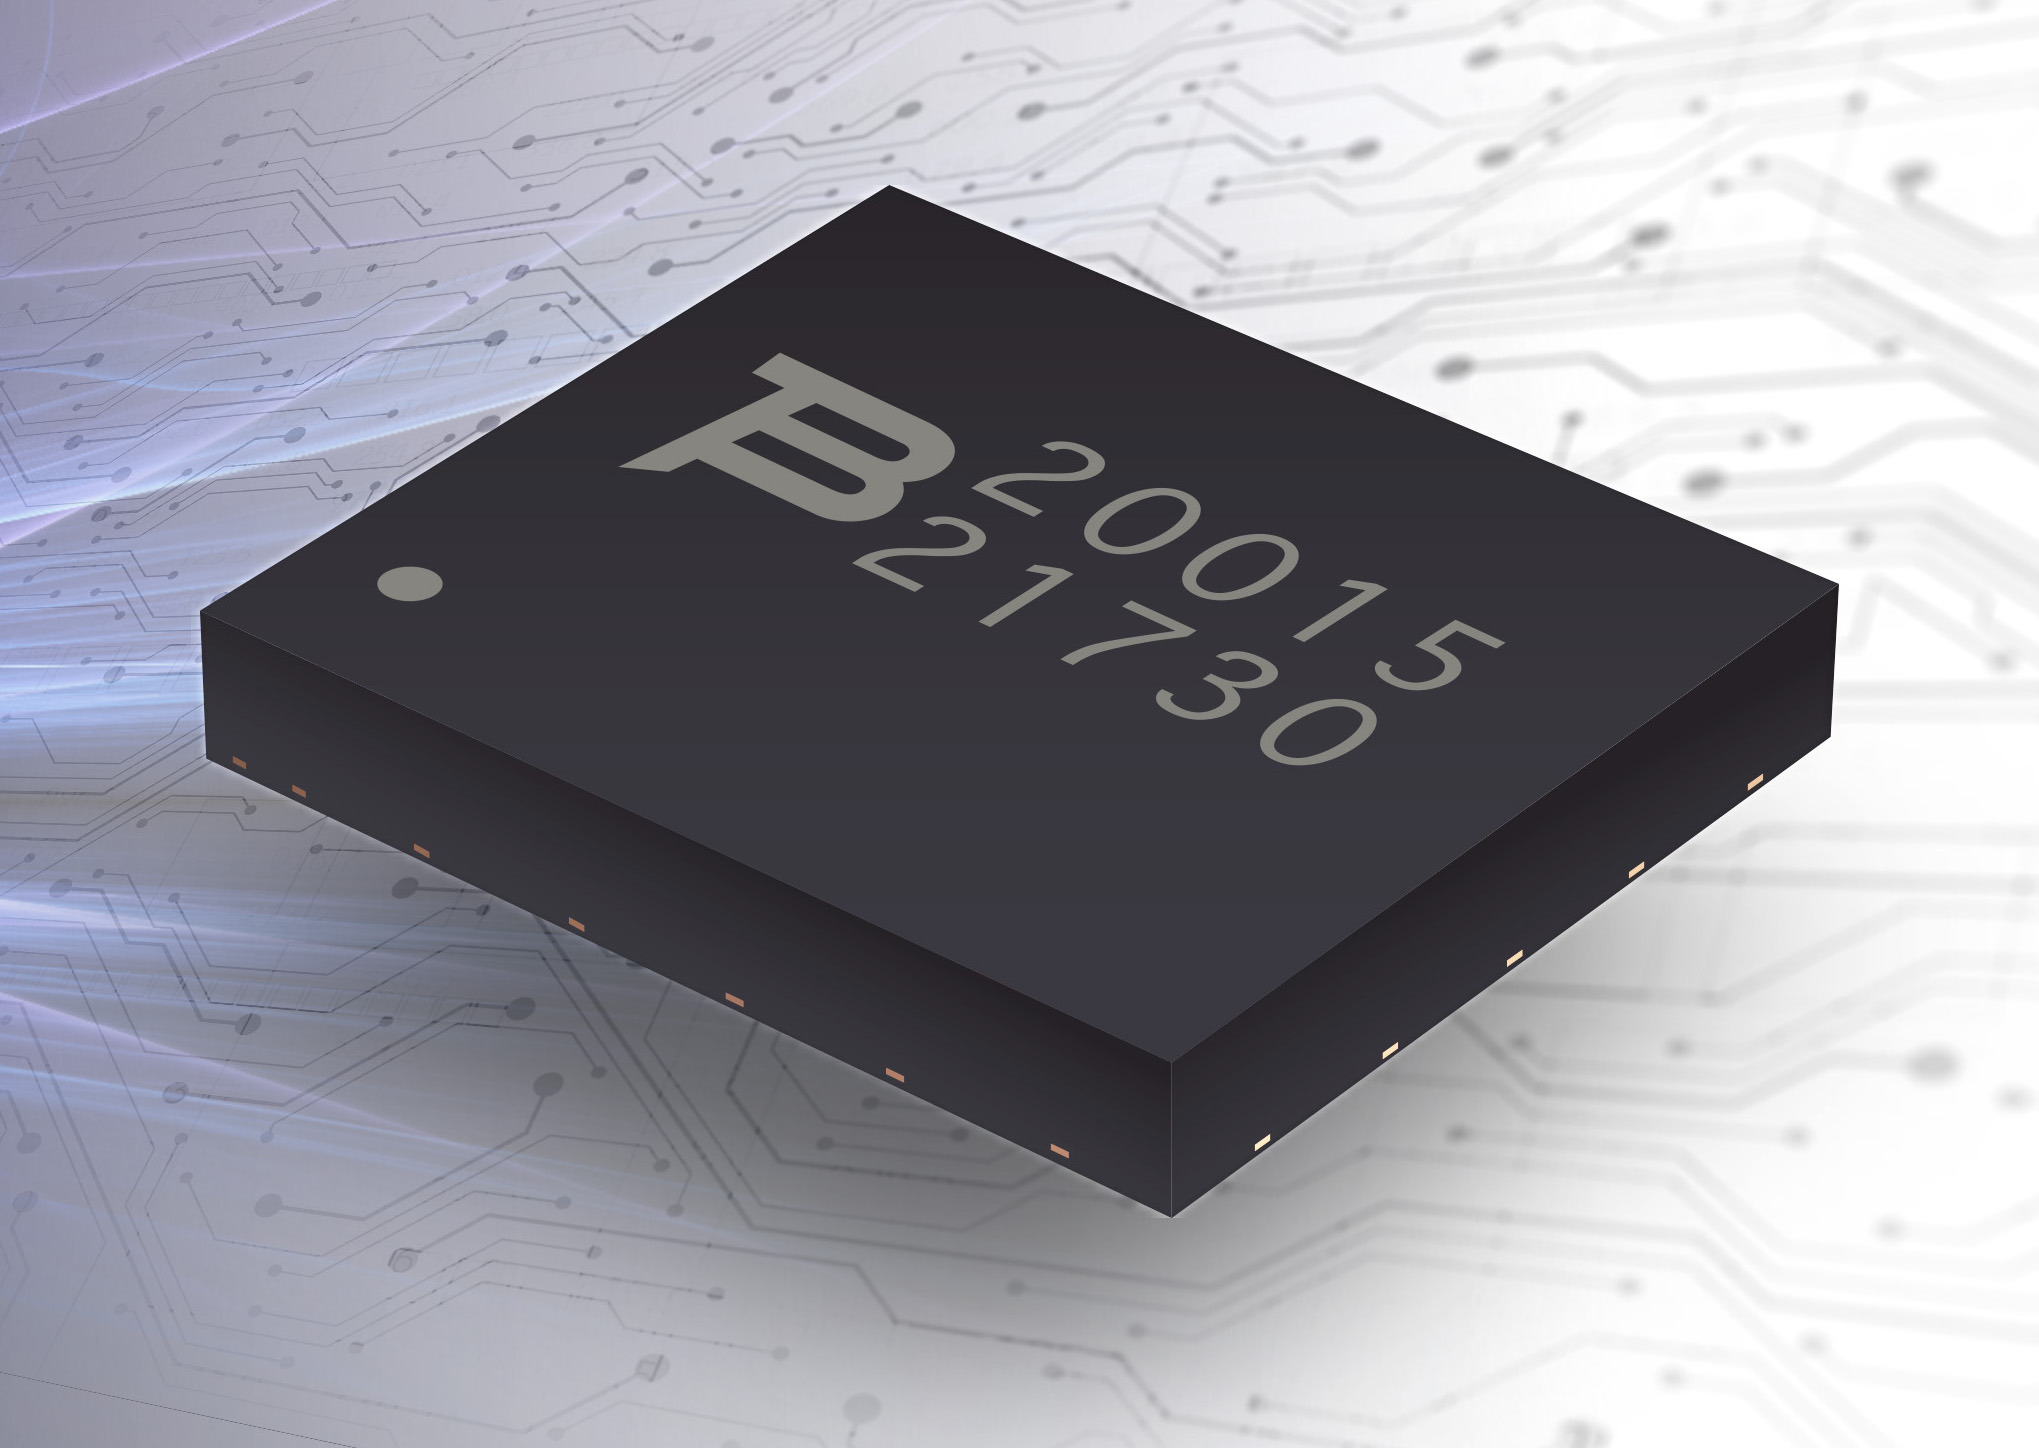 Bourns' Highest Current Carrying PTVS Diode Series in a Compact DFN Package